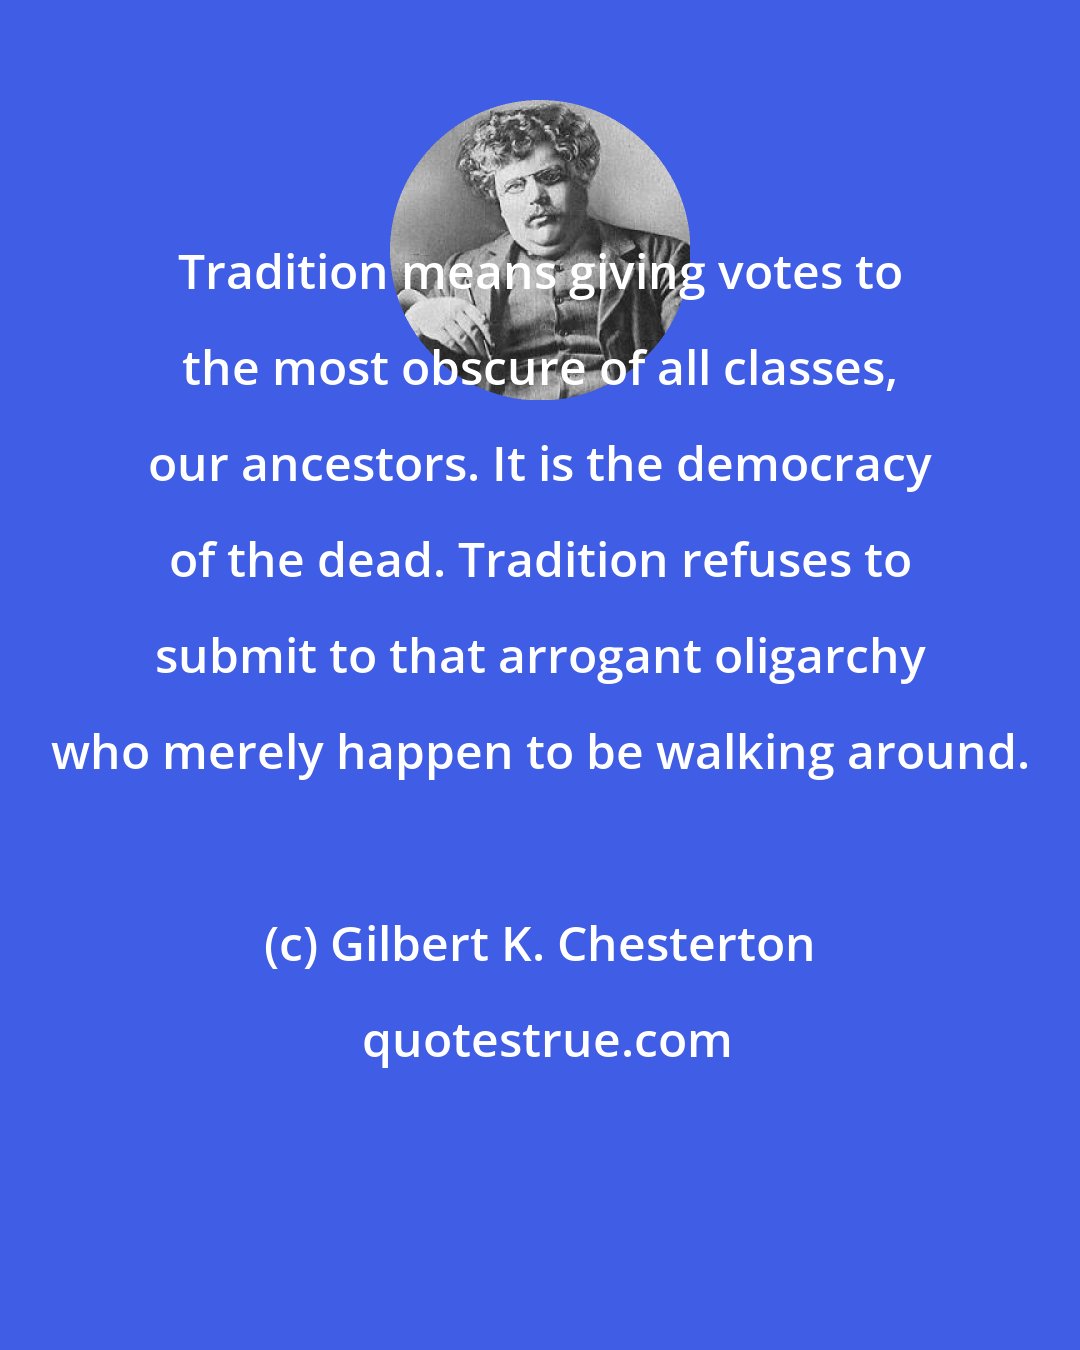 Gilbert K. Chesterton: Tradition means giving votes to the most obscure of all classes, our ancestors. It is the democracy of the dead. Tradition refuses to submit to that arrogant oligarchy who merely happen to be walking around.